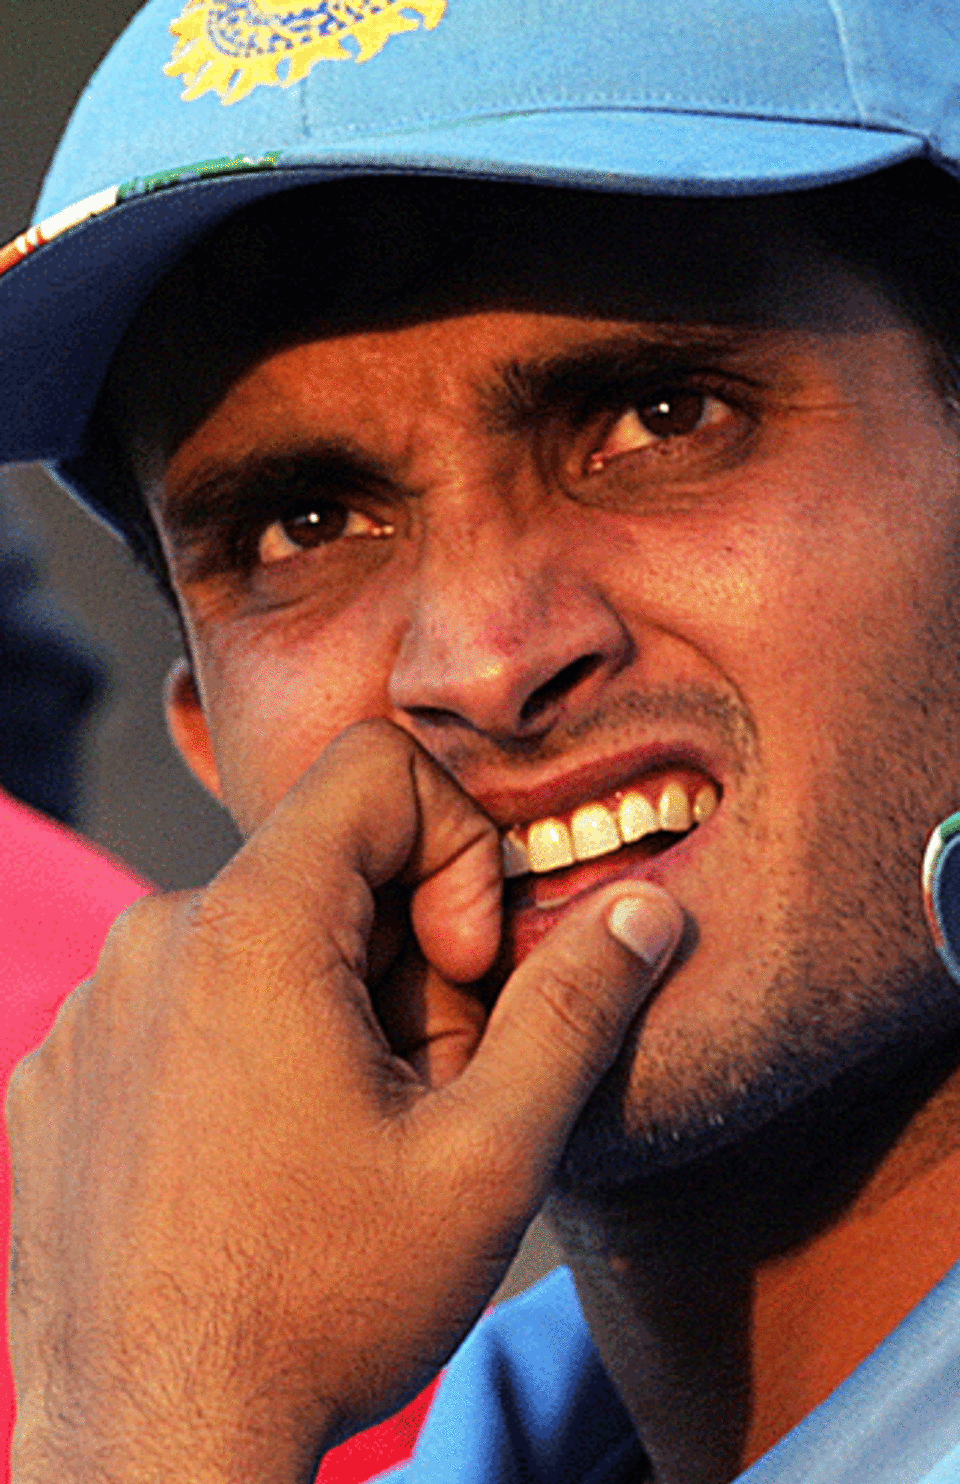 Sourav Ganguly ponders another dismal Indian performance